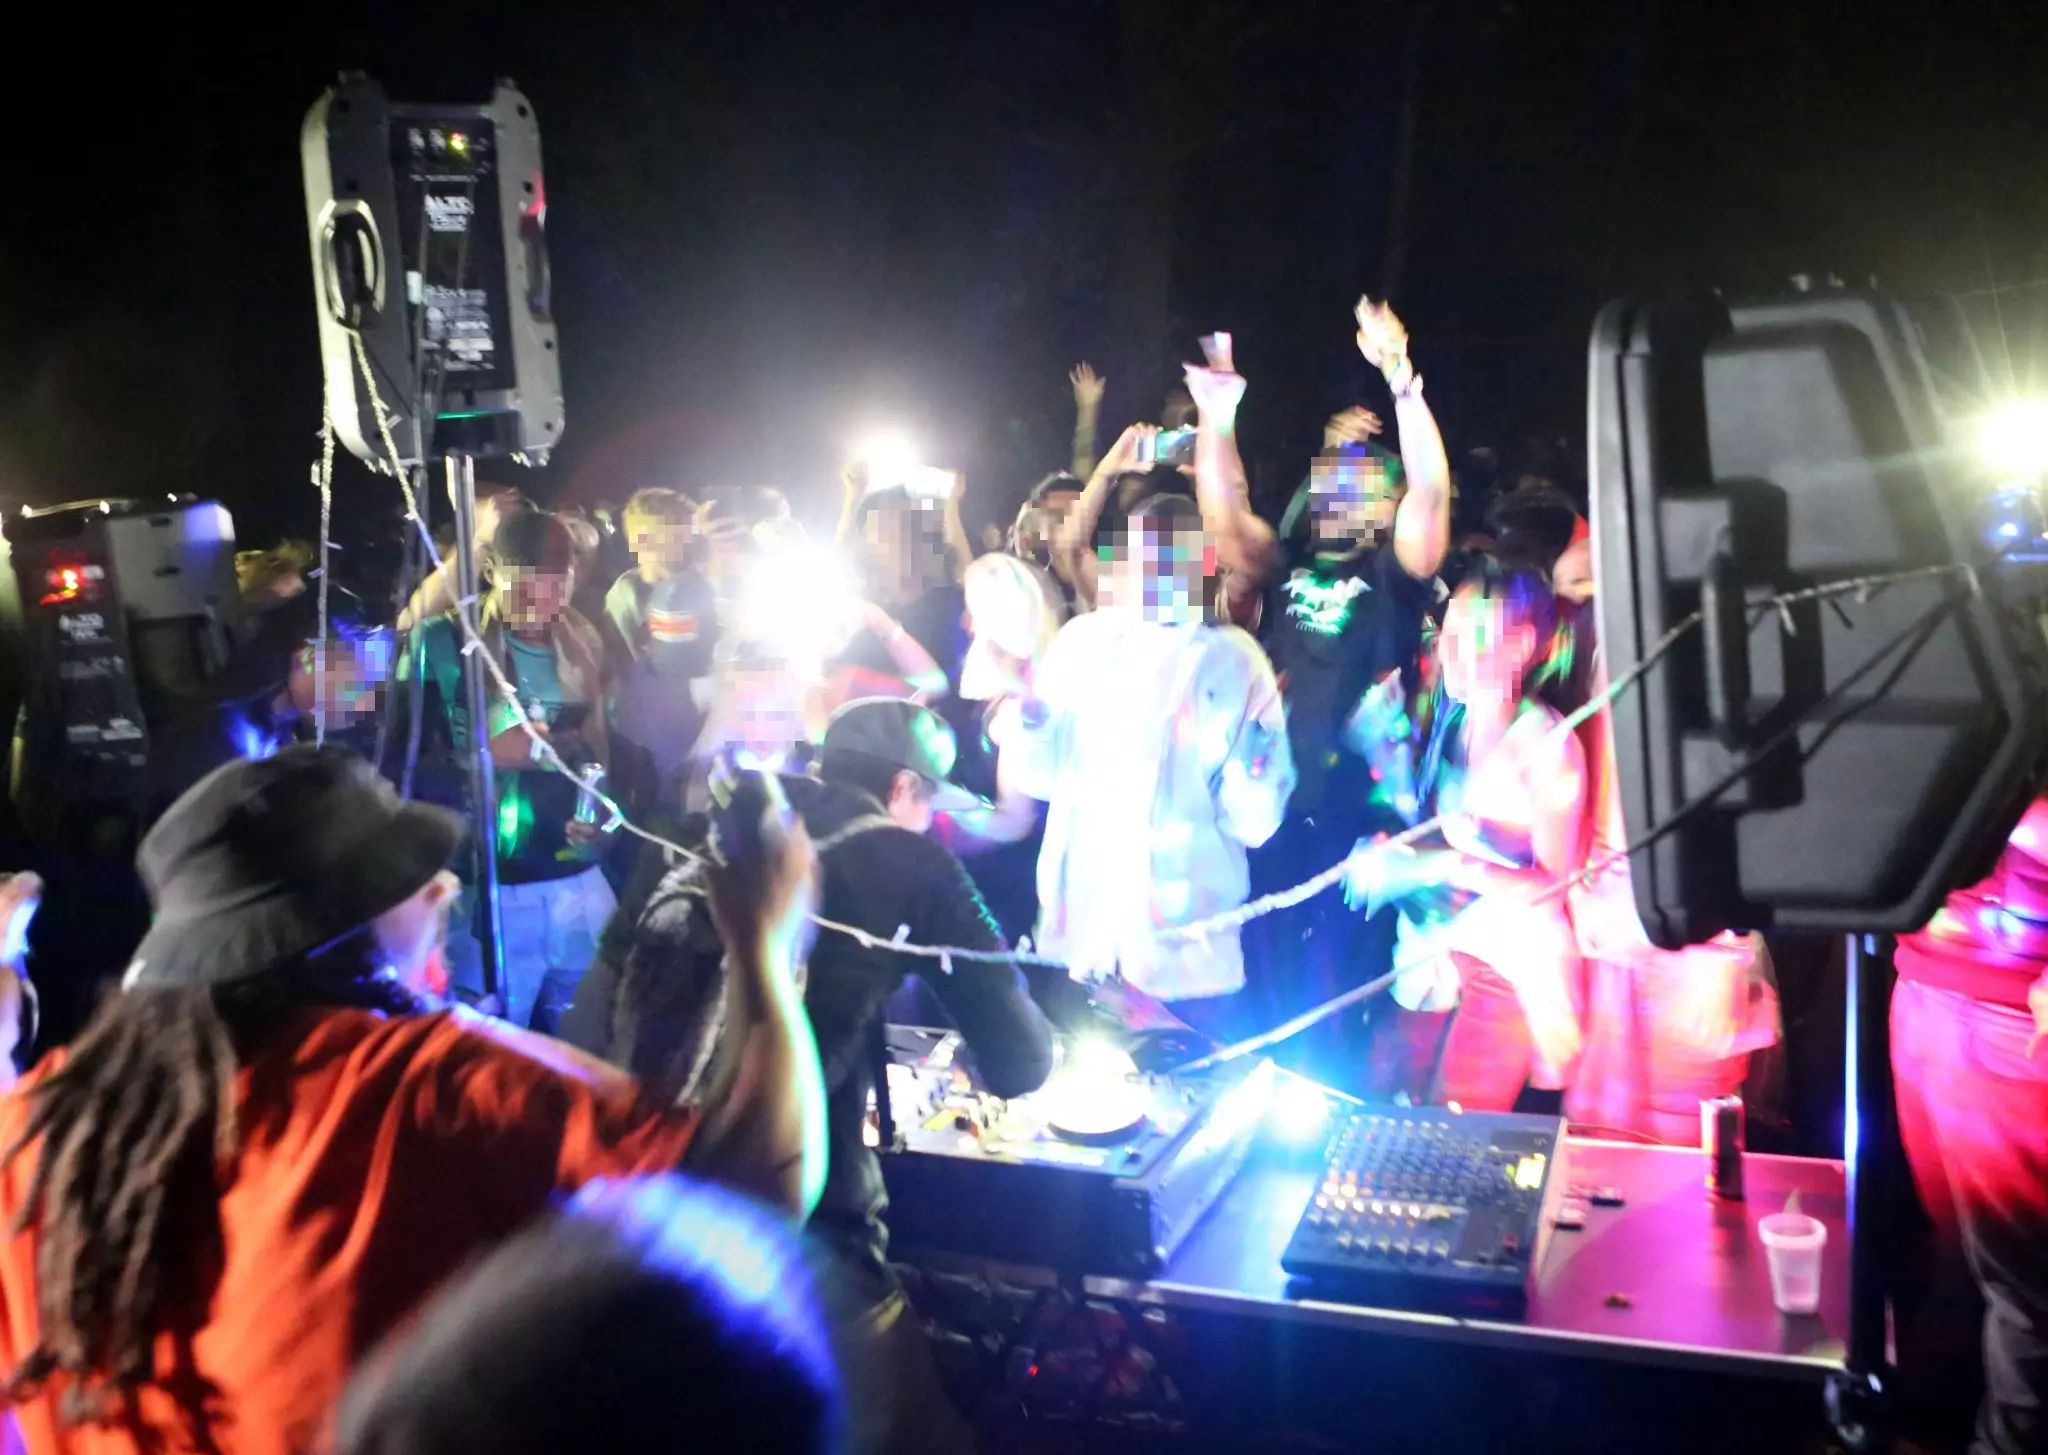 More than 500 people allegedly attended the illegal rave.